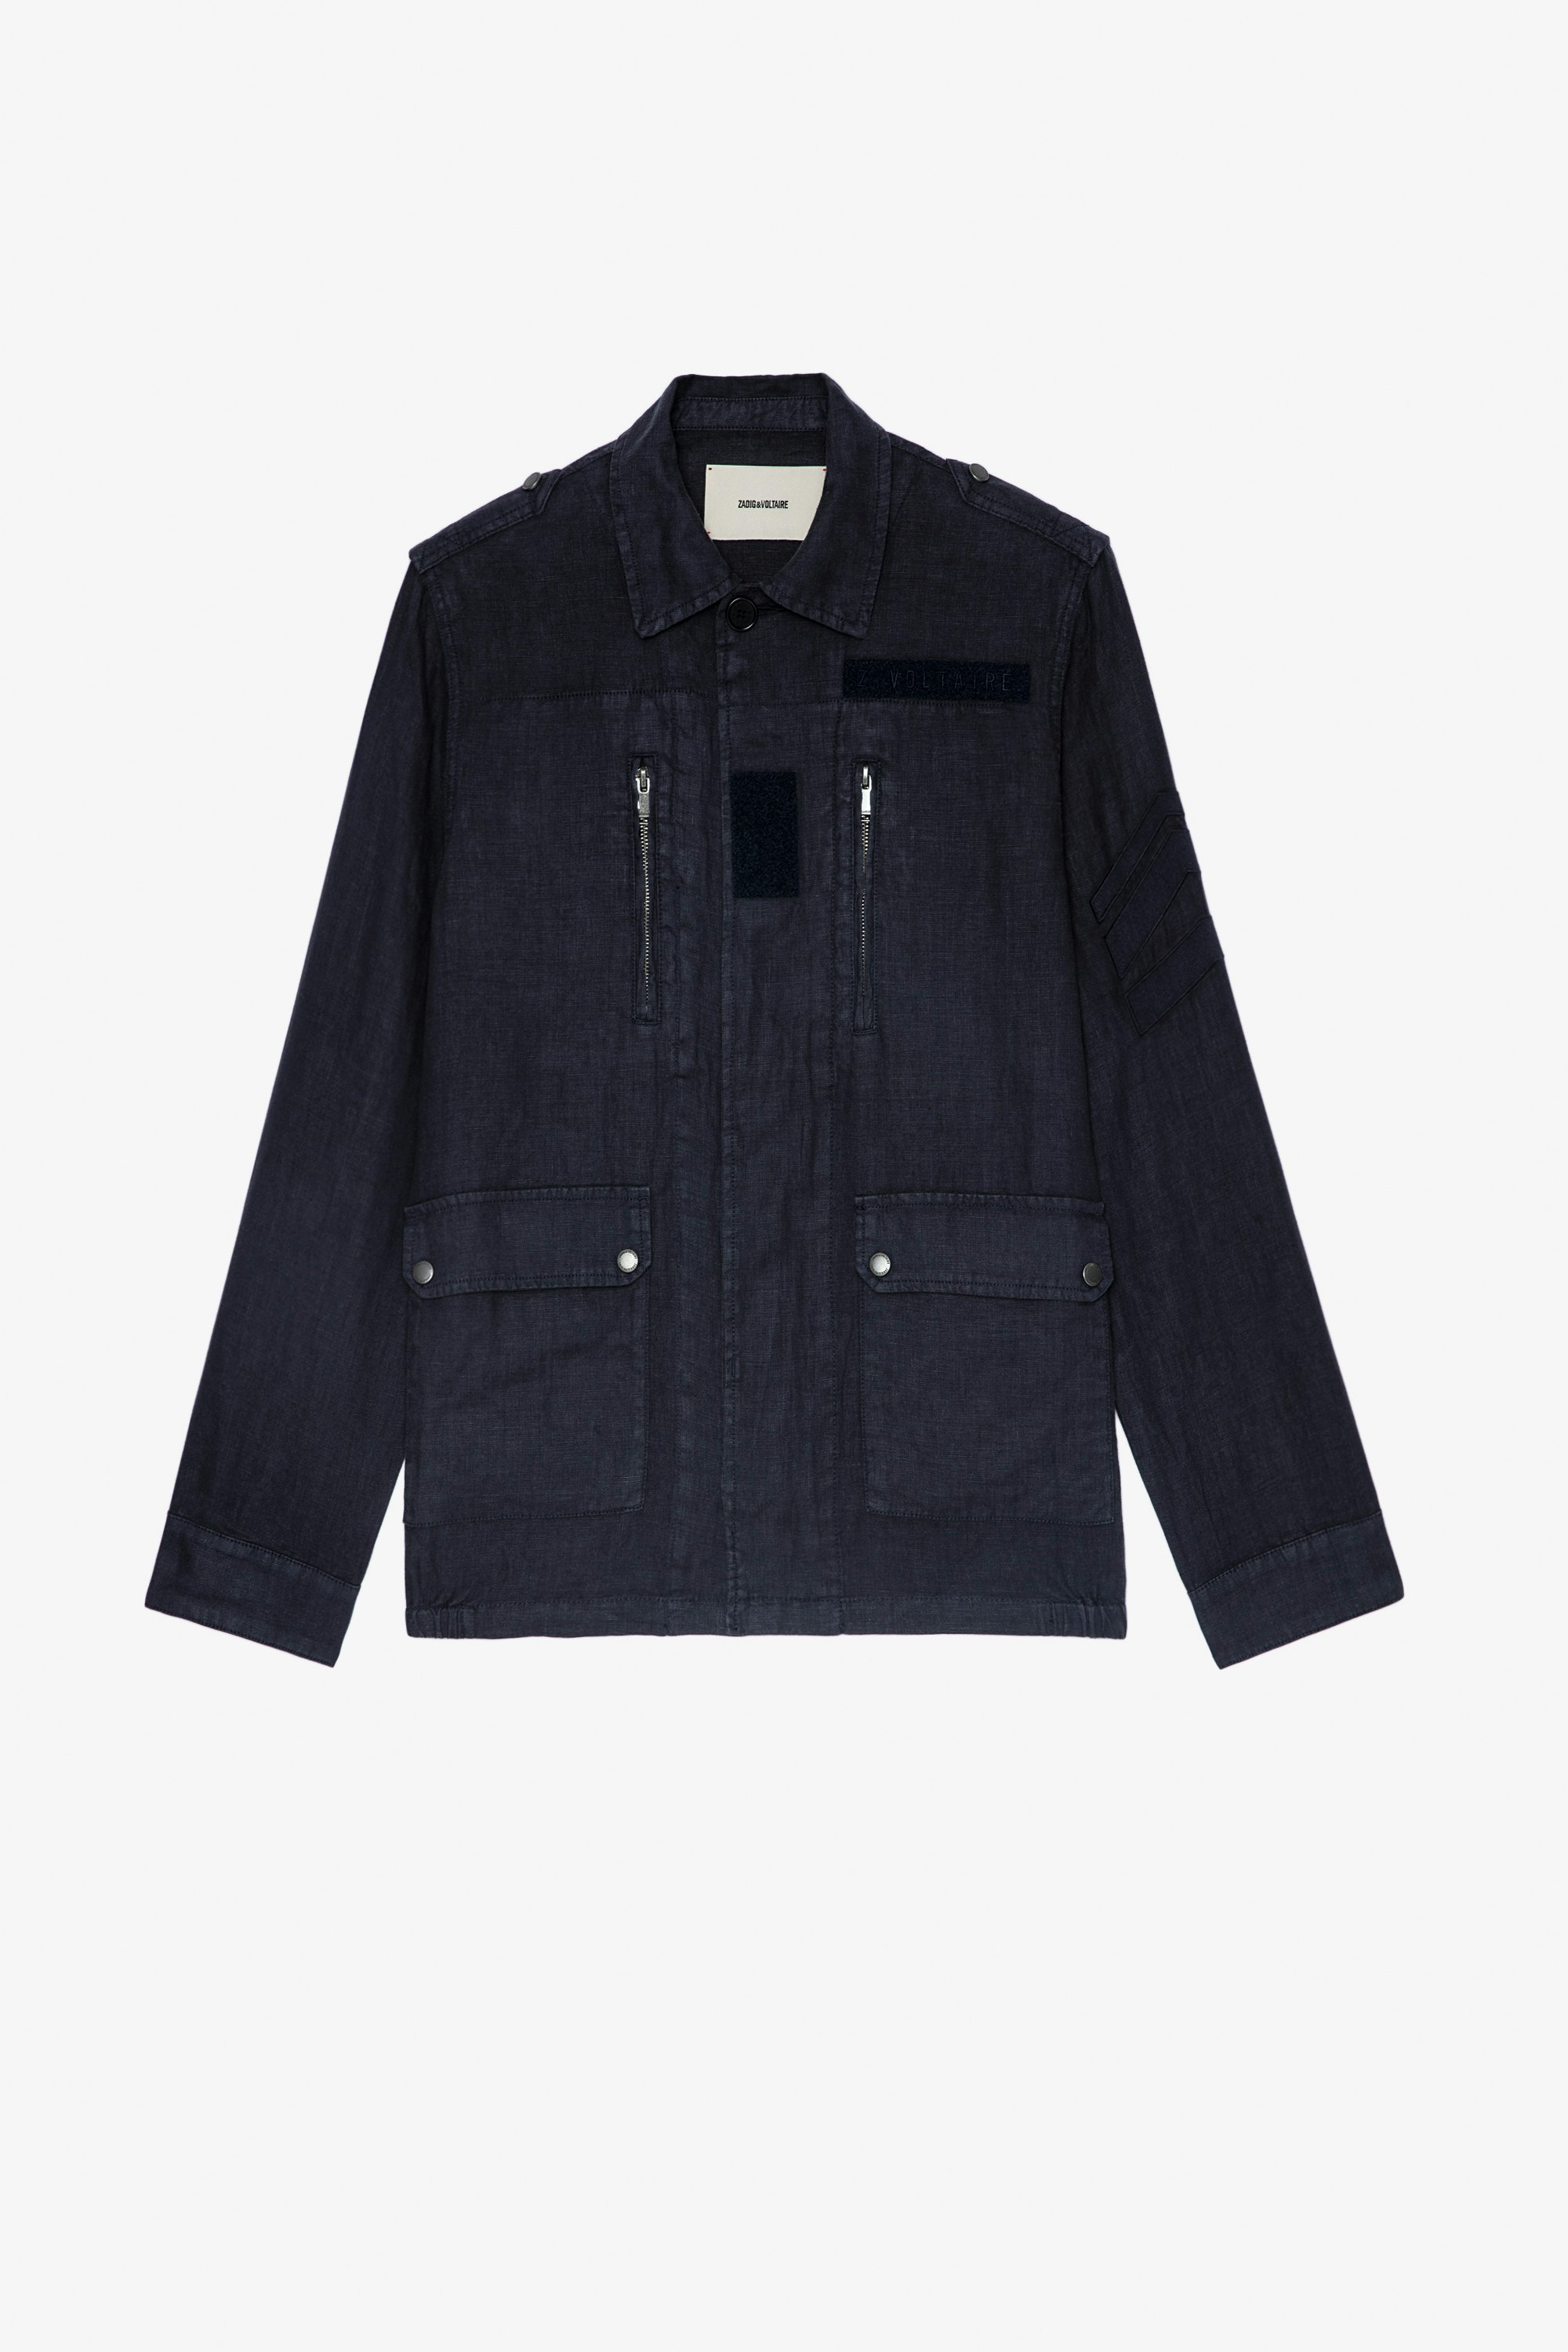 Kido Jacket Men's short military parka in navy blue linen with an arrow on the left sleeve